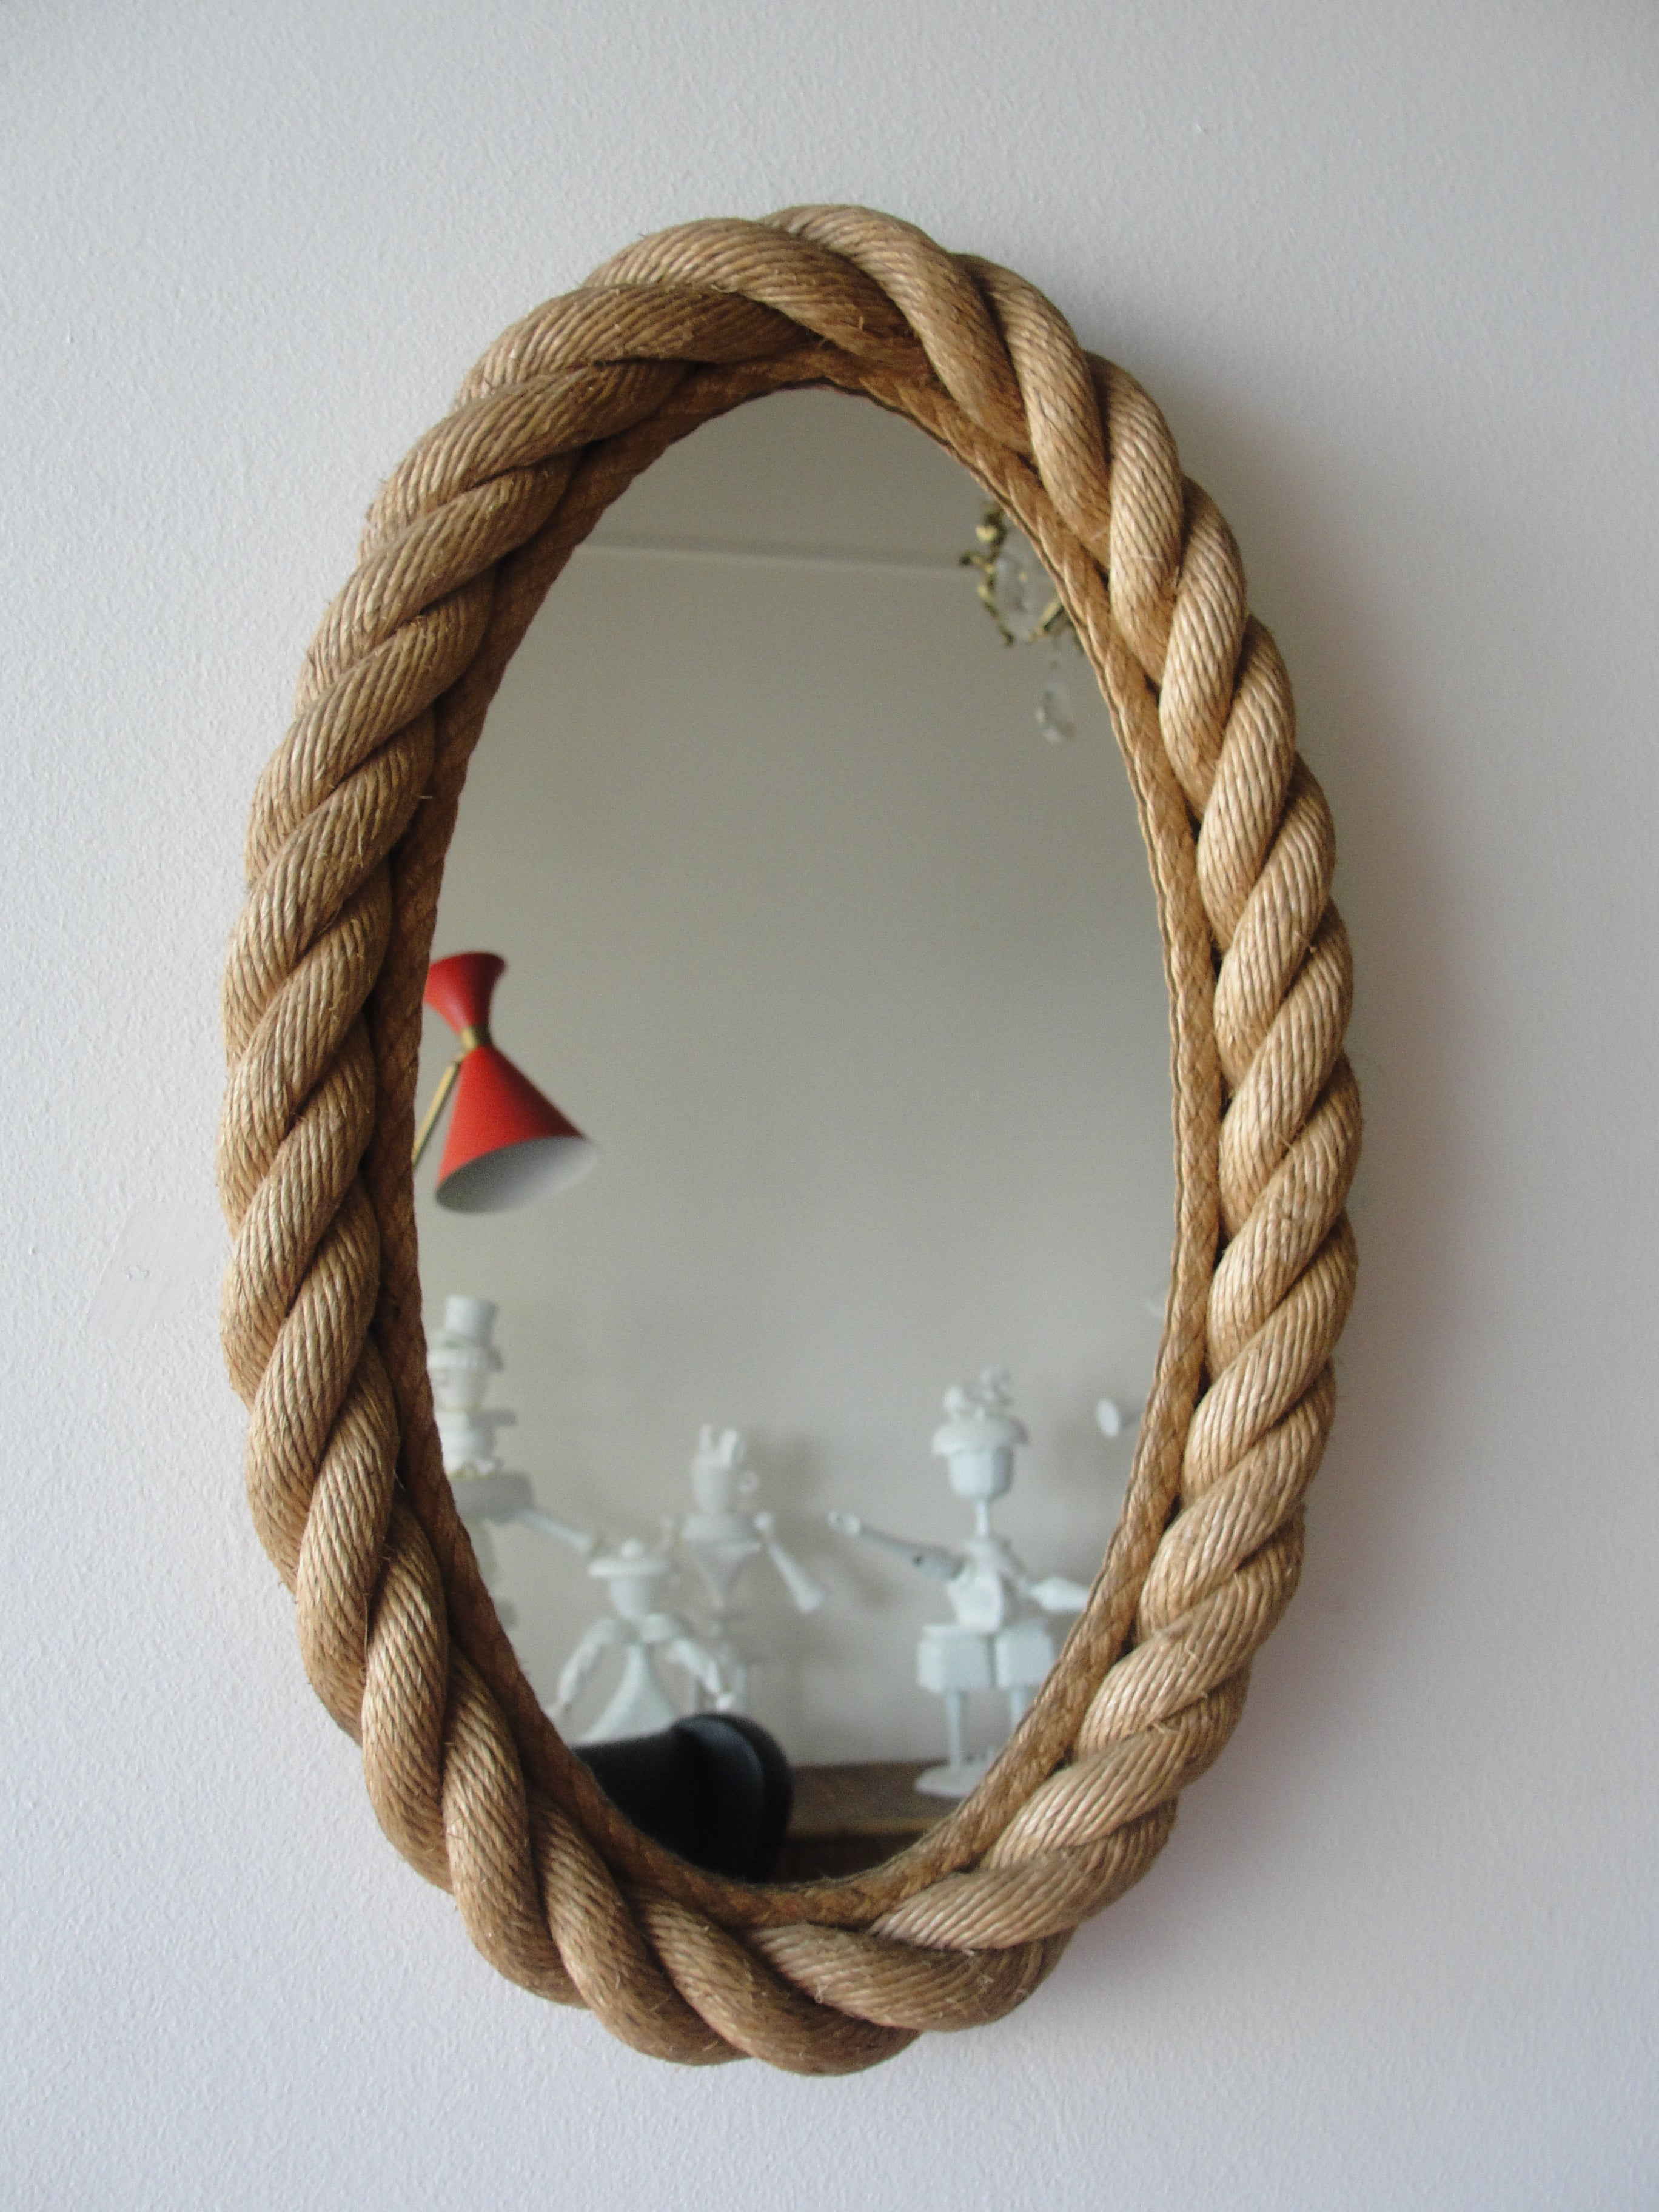 Braided rope frame oval mirror, with rope edge between glass and braided rope border by Audoux et Minet, French, 1950s.

This item is currently in our MIAMI facility.